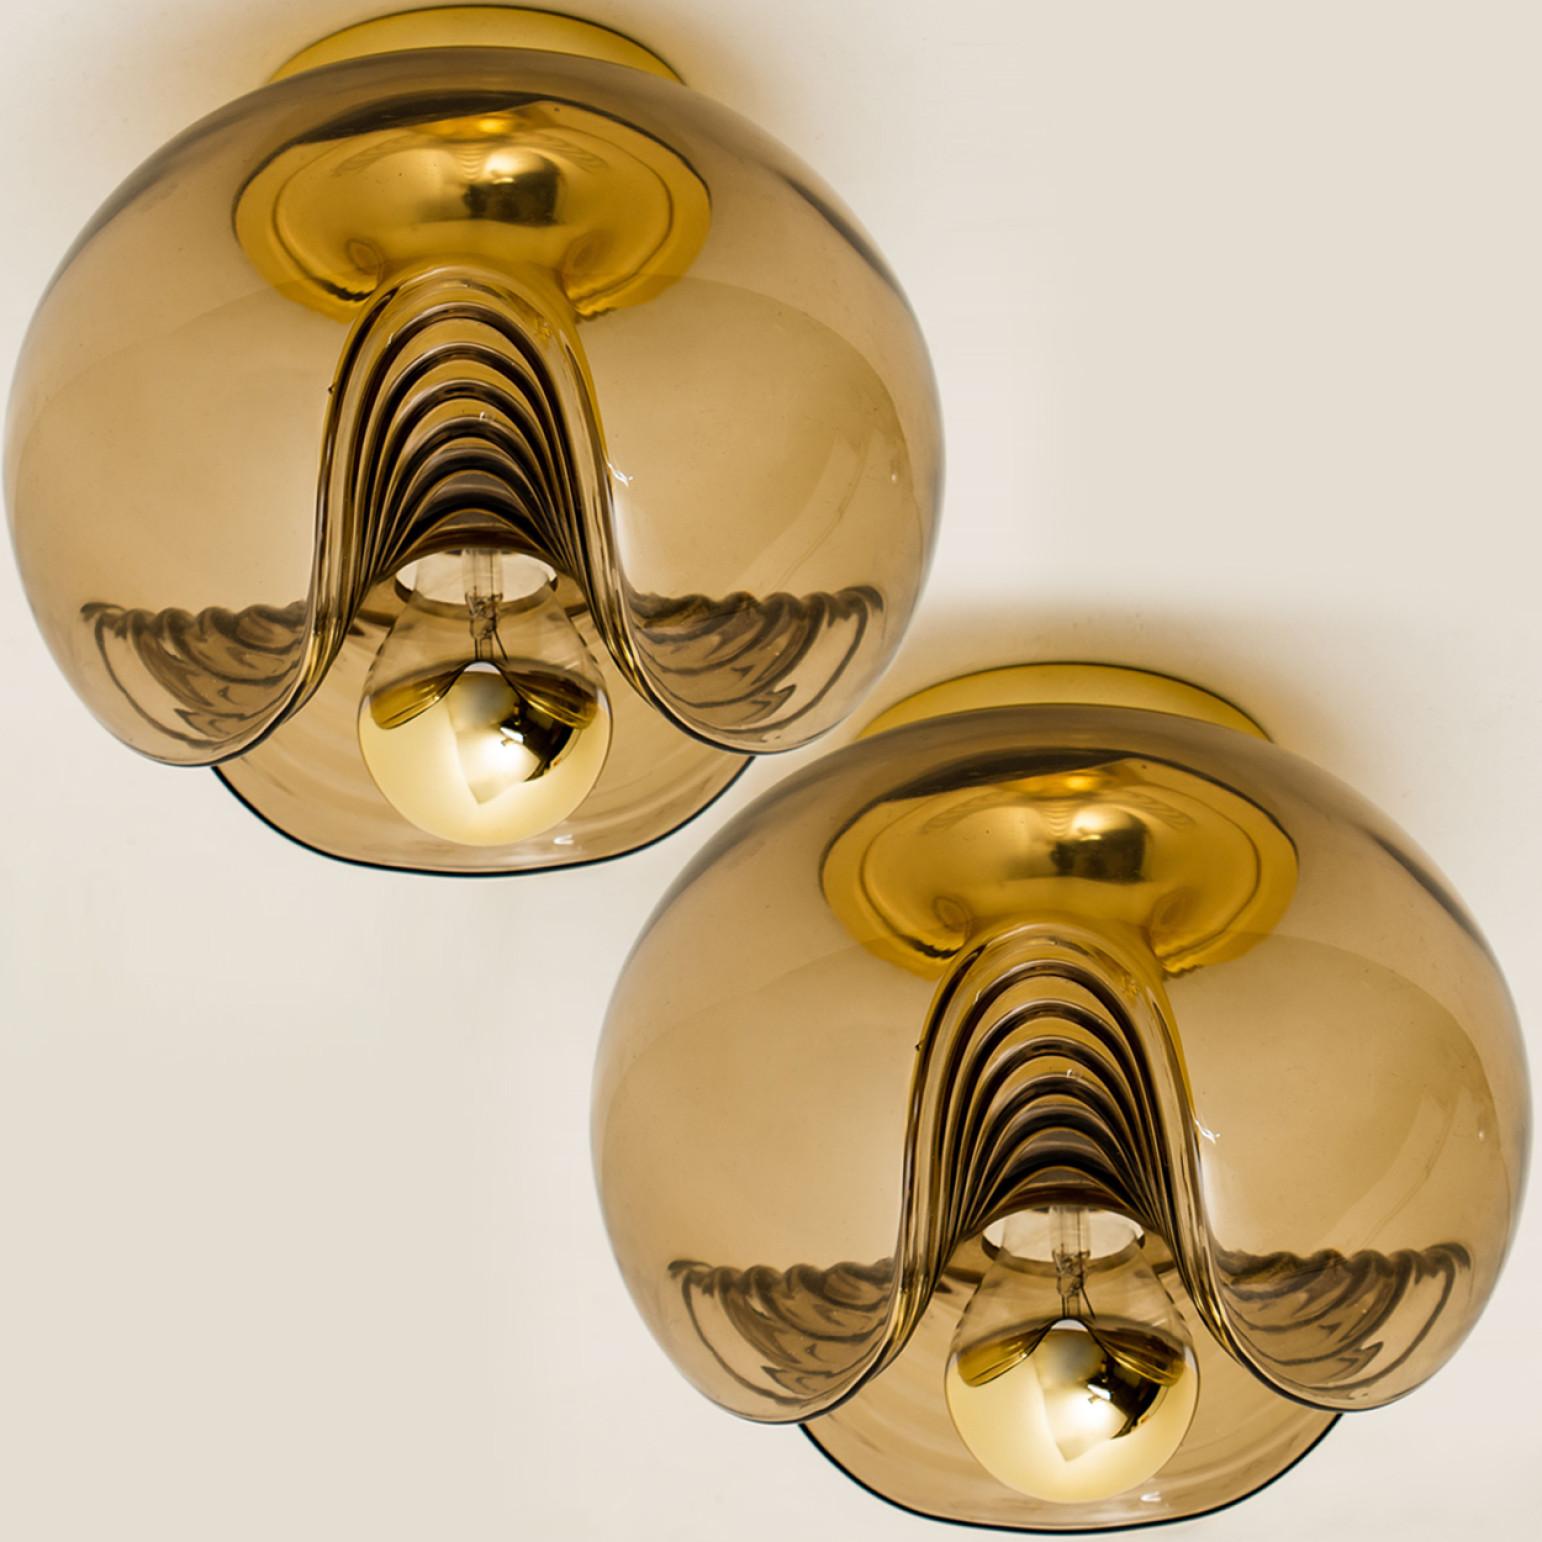 Midcentury flush mounts, wall lights or sconces designed by Koch & Lowy for Peill & Putzler in the 1970s. Featuring a smoked glass globe shade with a waved/ribbed molded bubble form. Casting a stunning rippled light across a wall or ceiling. The